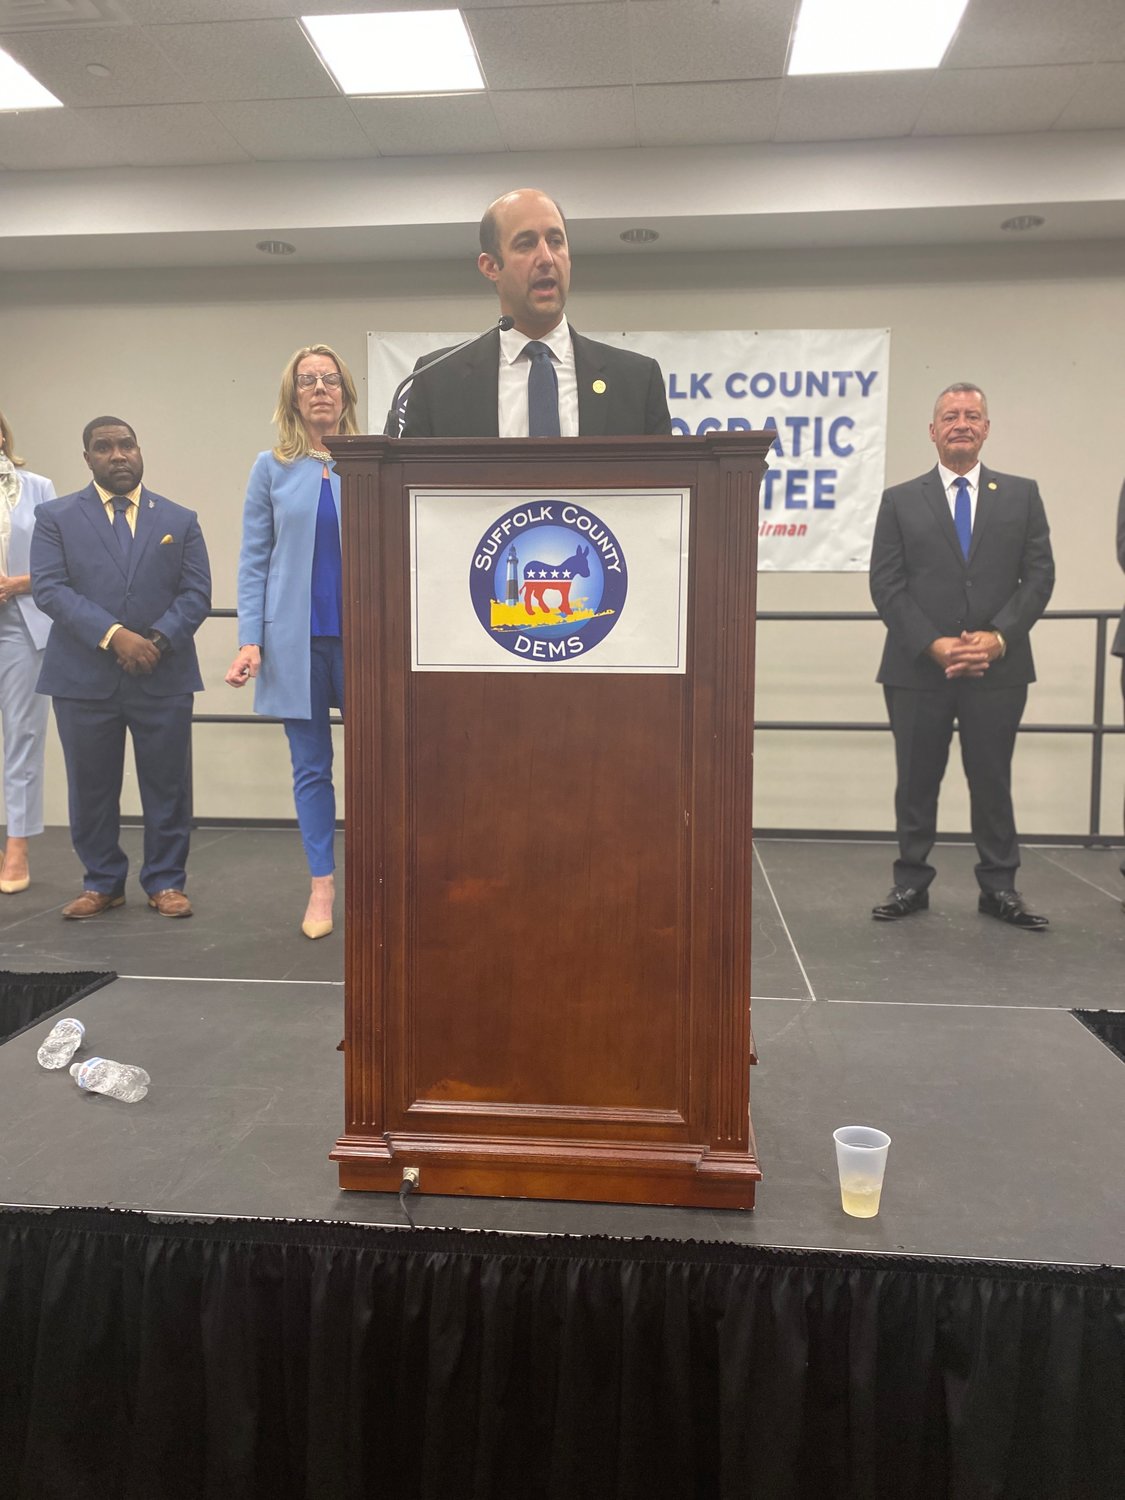 Presiding Officer of the Suffolk County Legislator Rob Calarco (pictured) was defeated by Republican Dom Thorne.